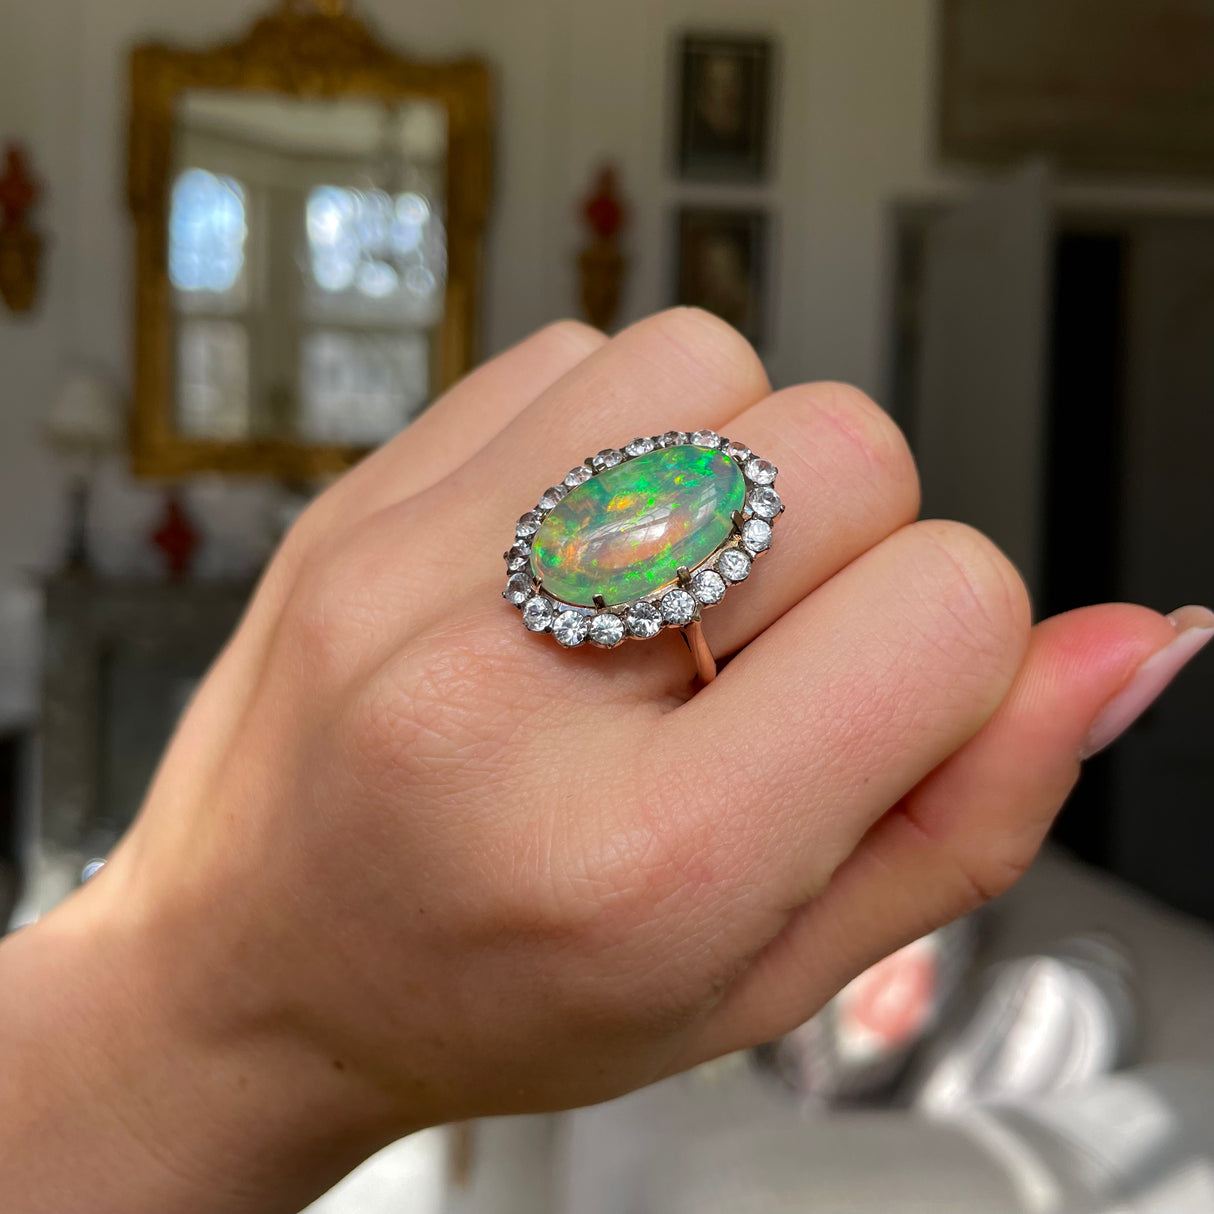 Antique opal and paste cluster ring, worn on hand.